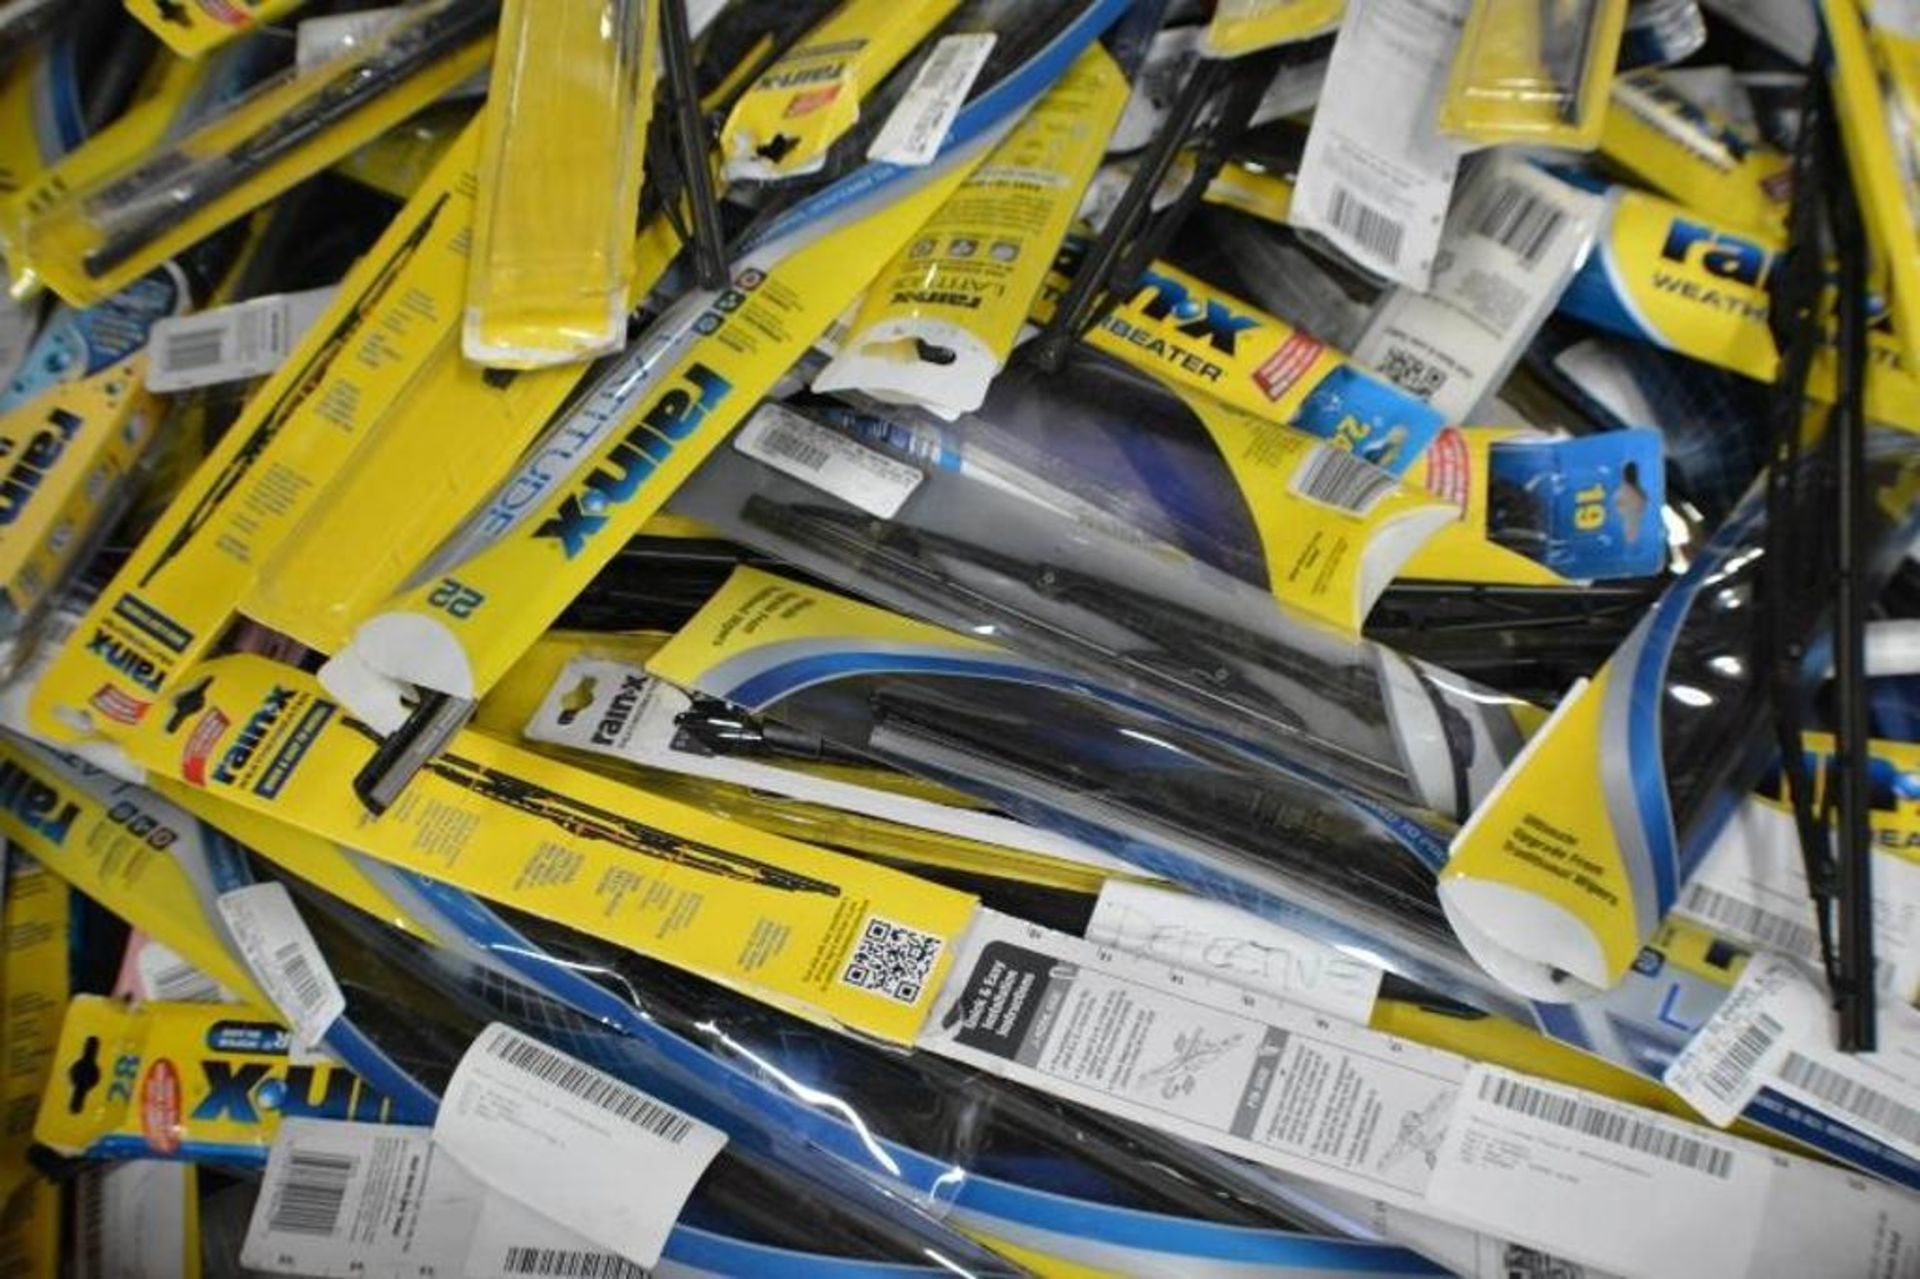 Wiper Blades. Assorted Brands and Sizes. Contents of Pallet - Image 3 of 3